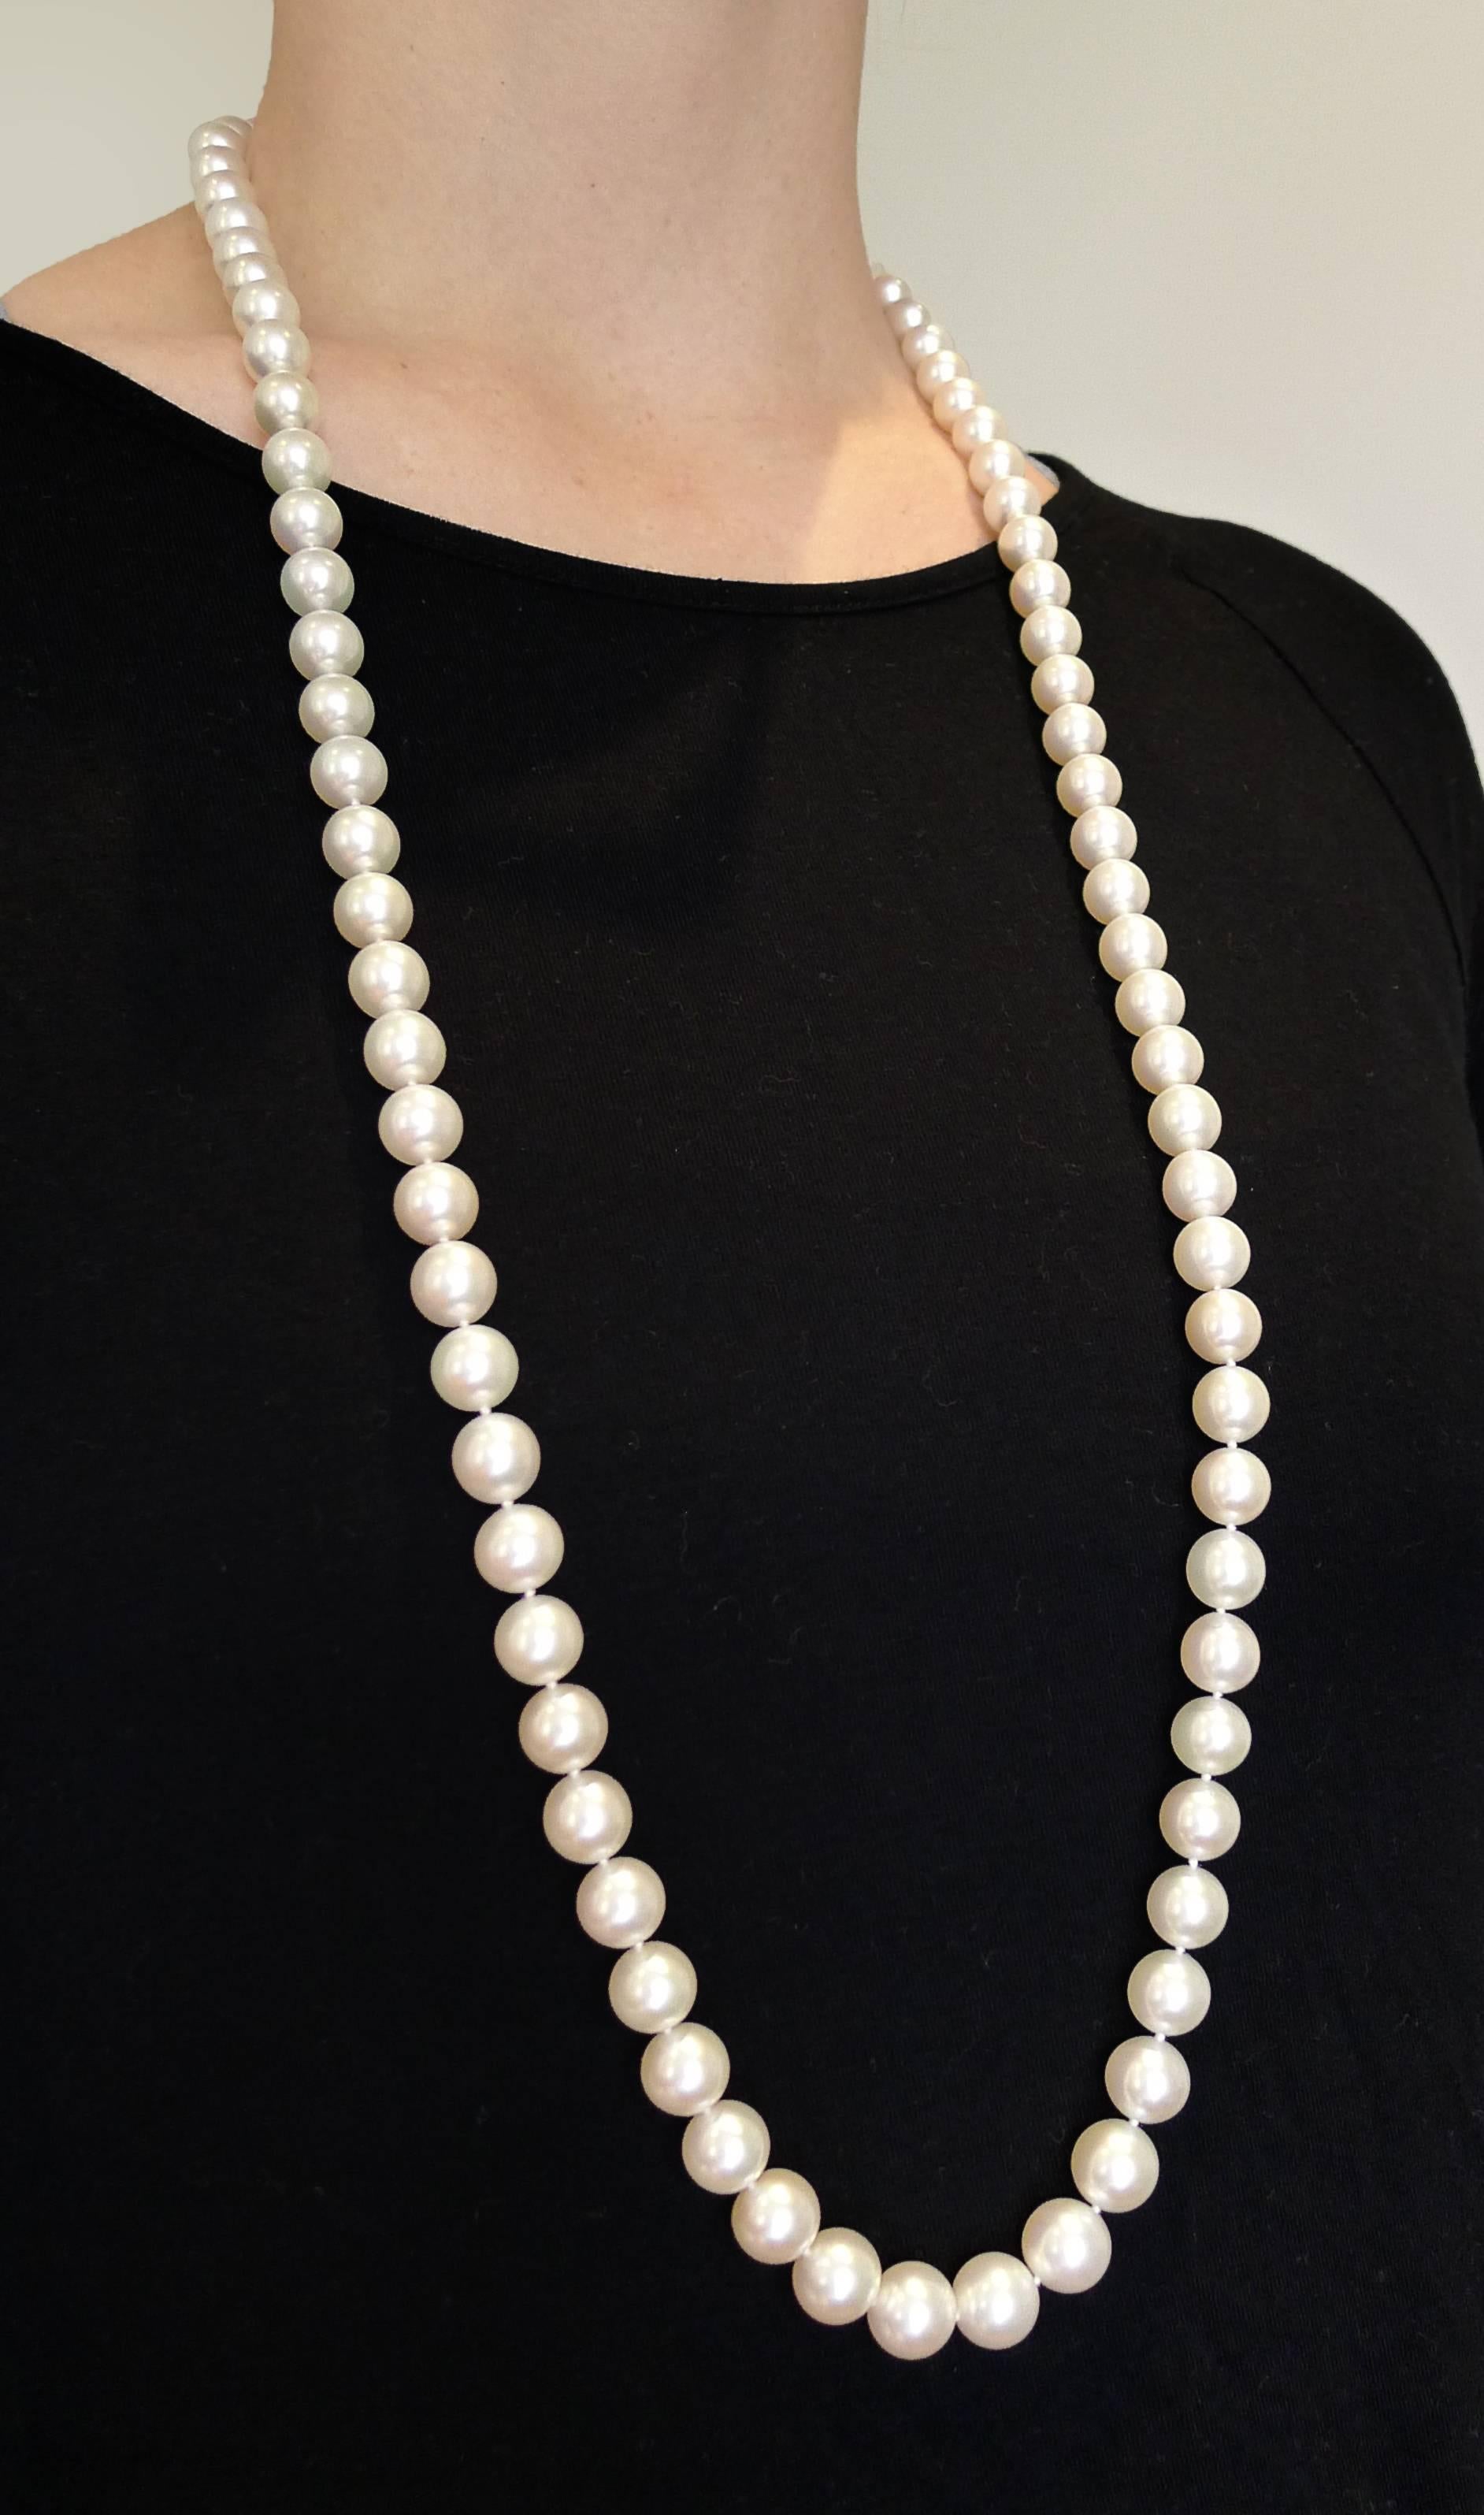 86 white South Sea pearls measure 10.1 to 11.7 millimeters in diameter,  38 inches in length and convert into one 29.5 inch necklace and one 8.5 inch bracelet.  Due to the large size of the pearls, the 8.5 inch bracelet fits like the average 7 inch